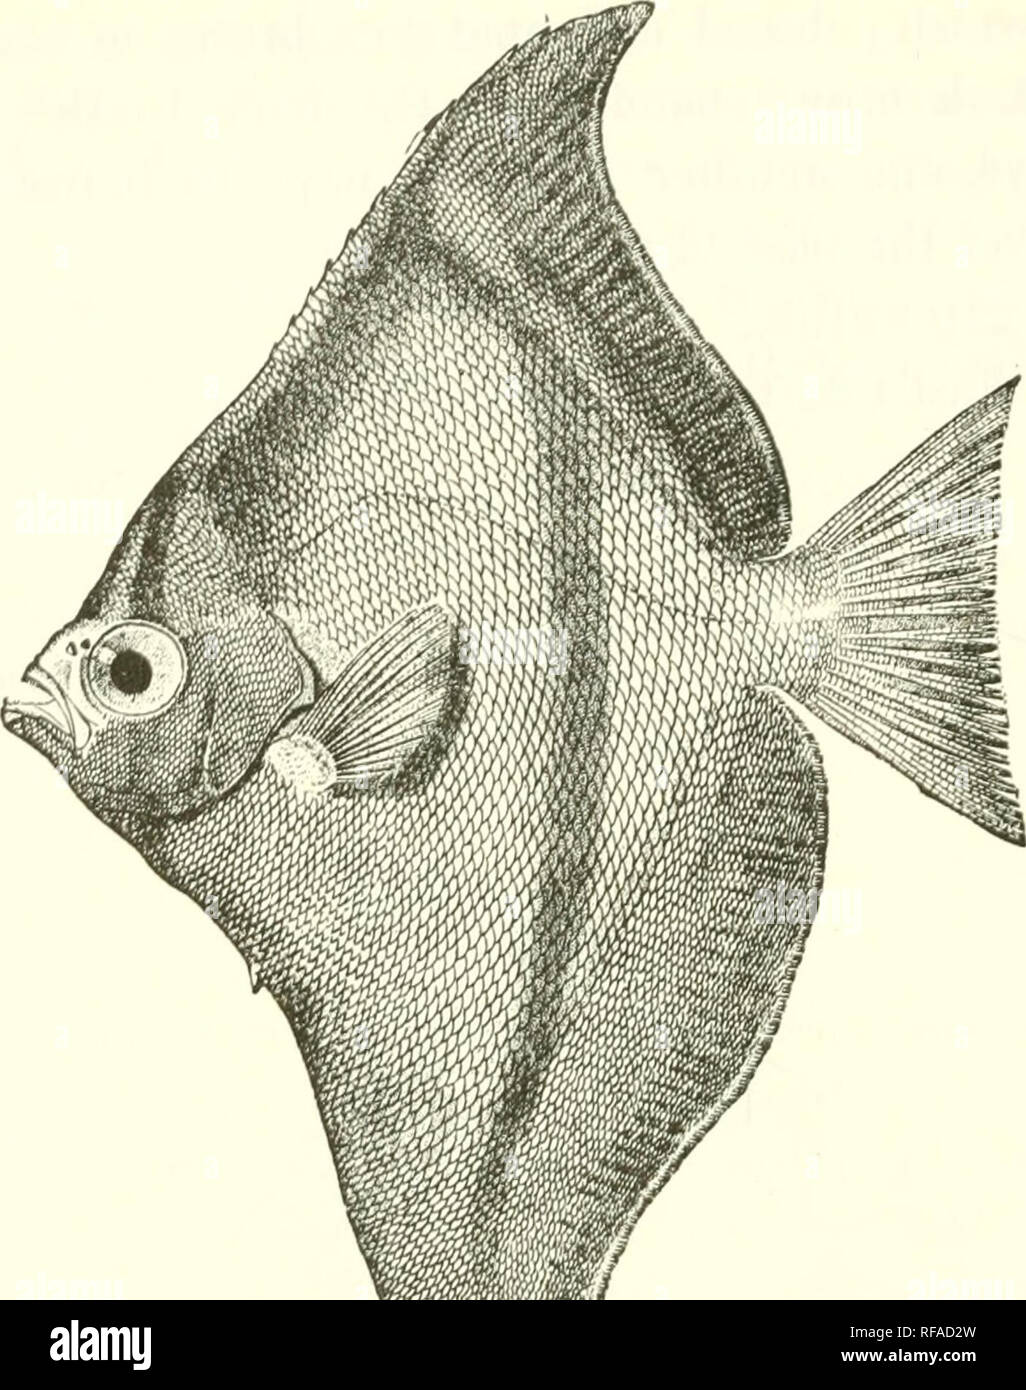 . Catalogue of the fresh-water fishes of Africa in the British Museum (Natural History). Fishes; Freshwater animals. 124 SCORPIDlD.i;. Fijr. 91,. P.-ictlns seboi. 'JVpo, after Cuvier and Valenciennes. |. l-:i A(J. &amp; yo-. 4-(;. Ilor. Si yo-. 7. 8kol. 8. Ho... 1). All. 10. Vo-. 11-12. Yo. ];5. Ho,.. 11. Sk(!l. 1.0-KJ. A.l. 17. Hot. 18. Ad. 19-20. Ad. •&gt;. llor. 22-2;j. Hor. 244 2.&quot;). 2r,. A.l. St. Ijouis, Soncoal. L:io-.)s liUfToon. Gold Coast. Nanna Km, Tjihcria. Niger. Nioor Delta. Old Calahar. Warri, Old Calahar. ('anieroon. Benito !{., l'&gt; mih's IVoiu inoutli. (fal)oon. liiieo Stock Photo